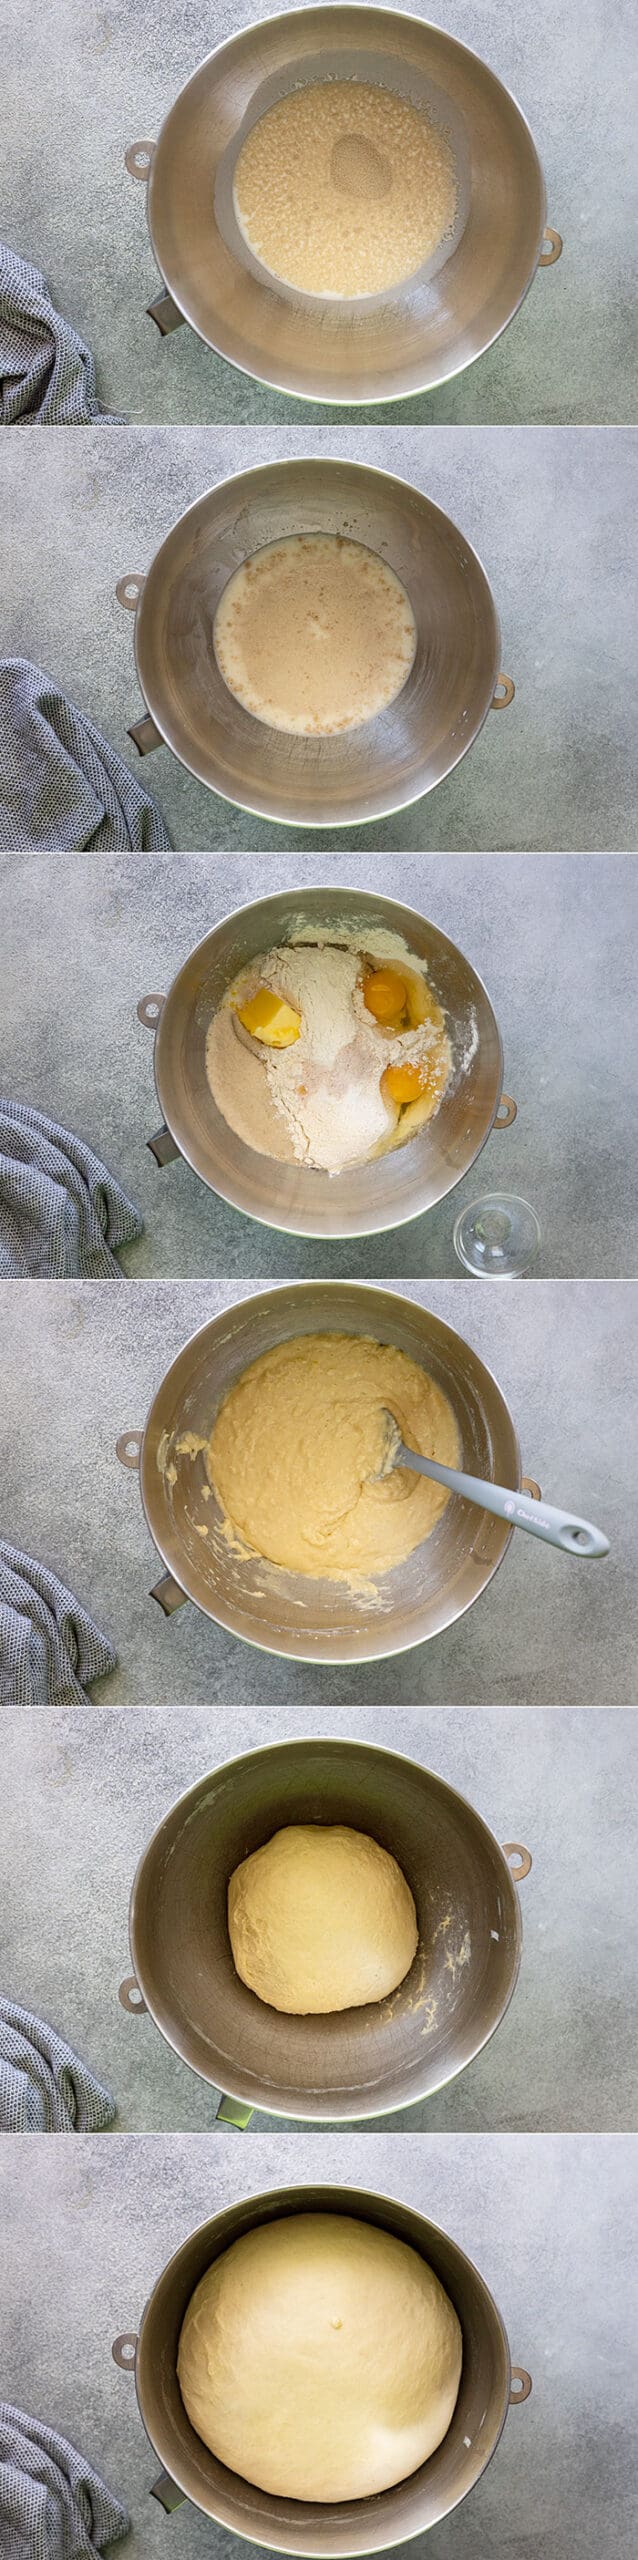 Six pictures showing how to mix and proof the dough for cinnamon rolls.